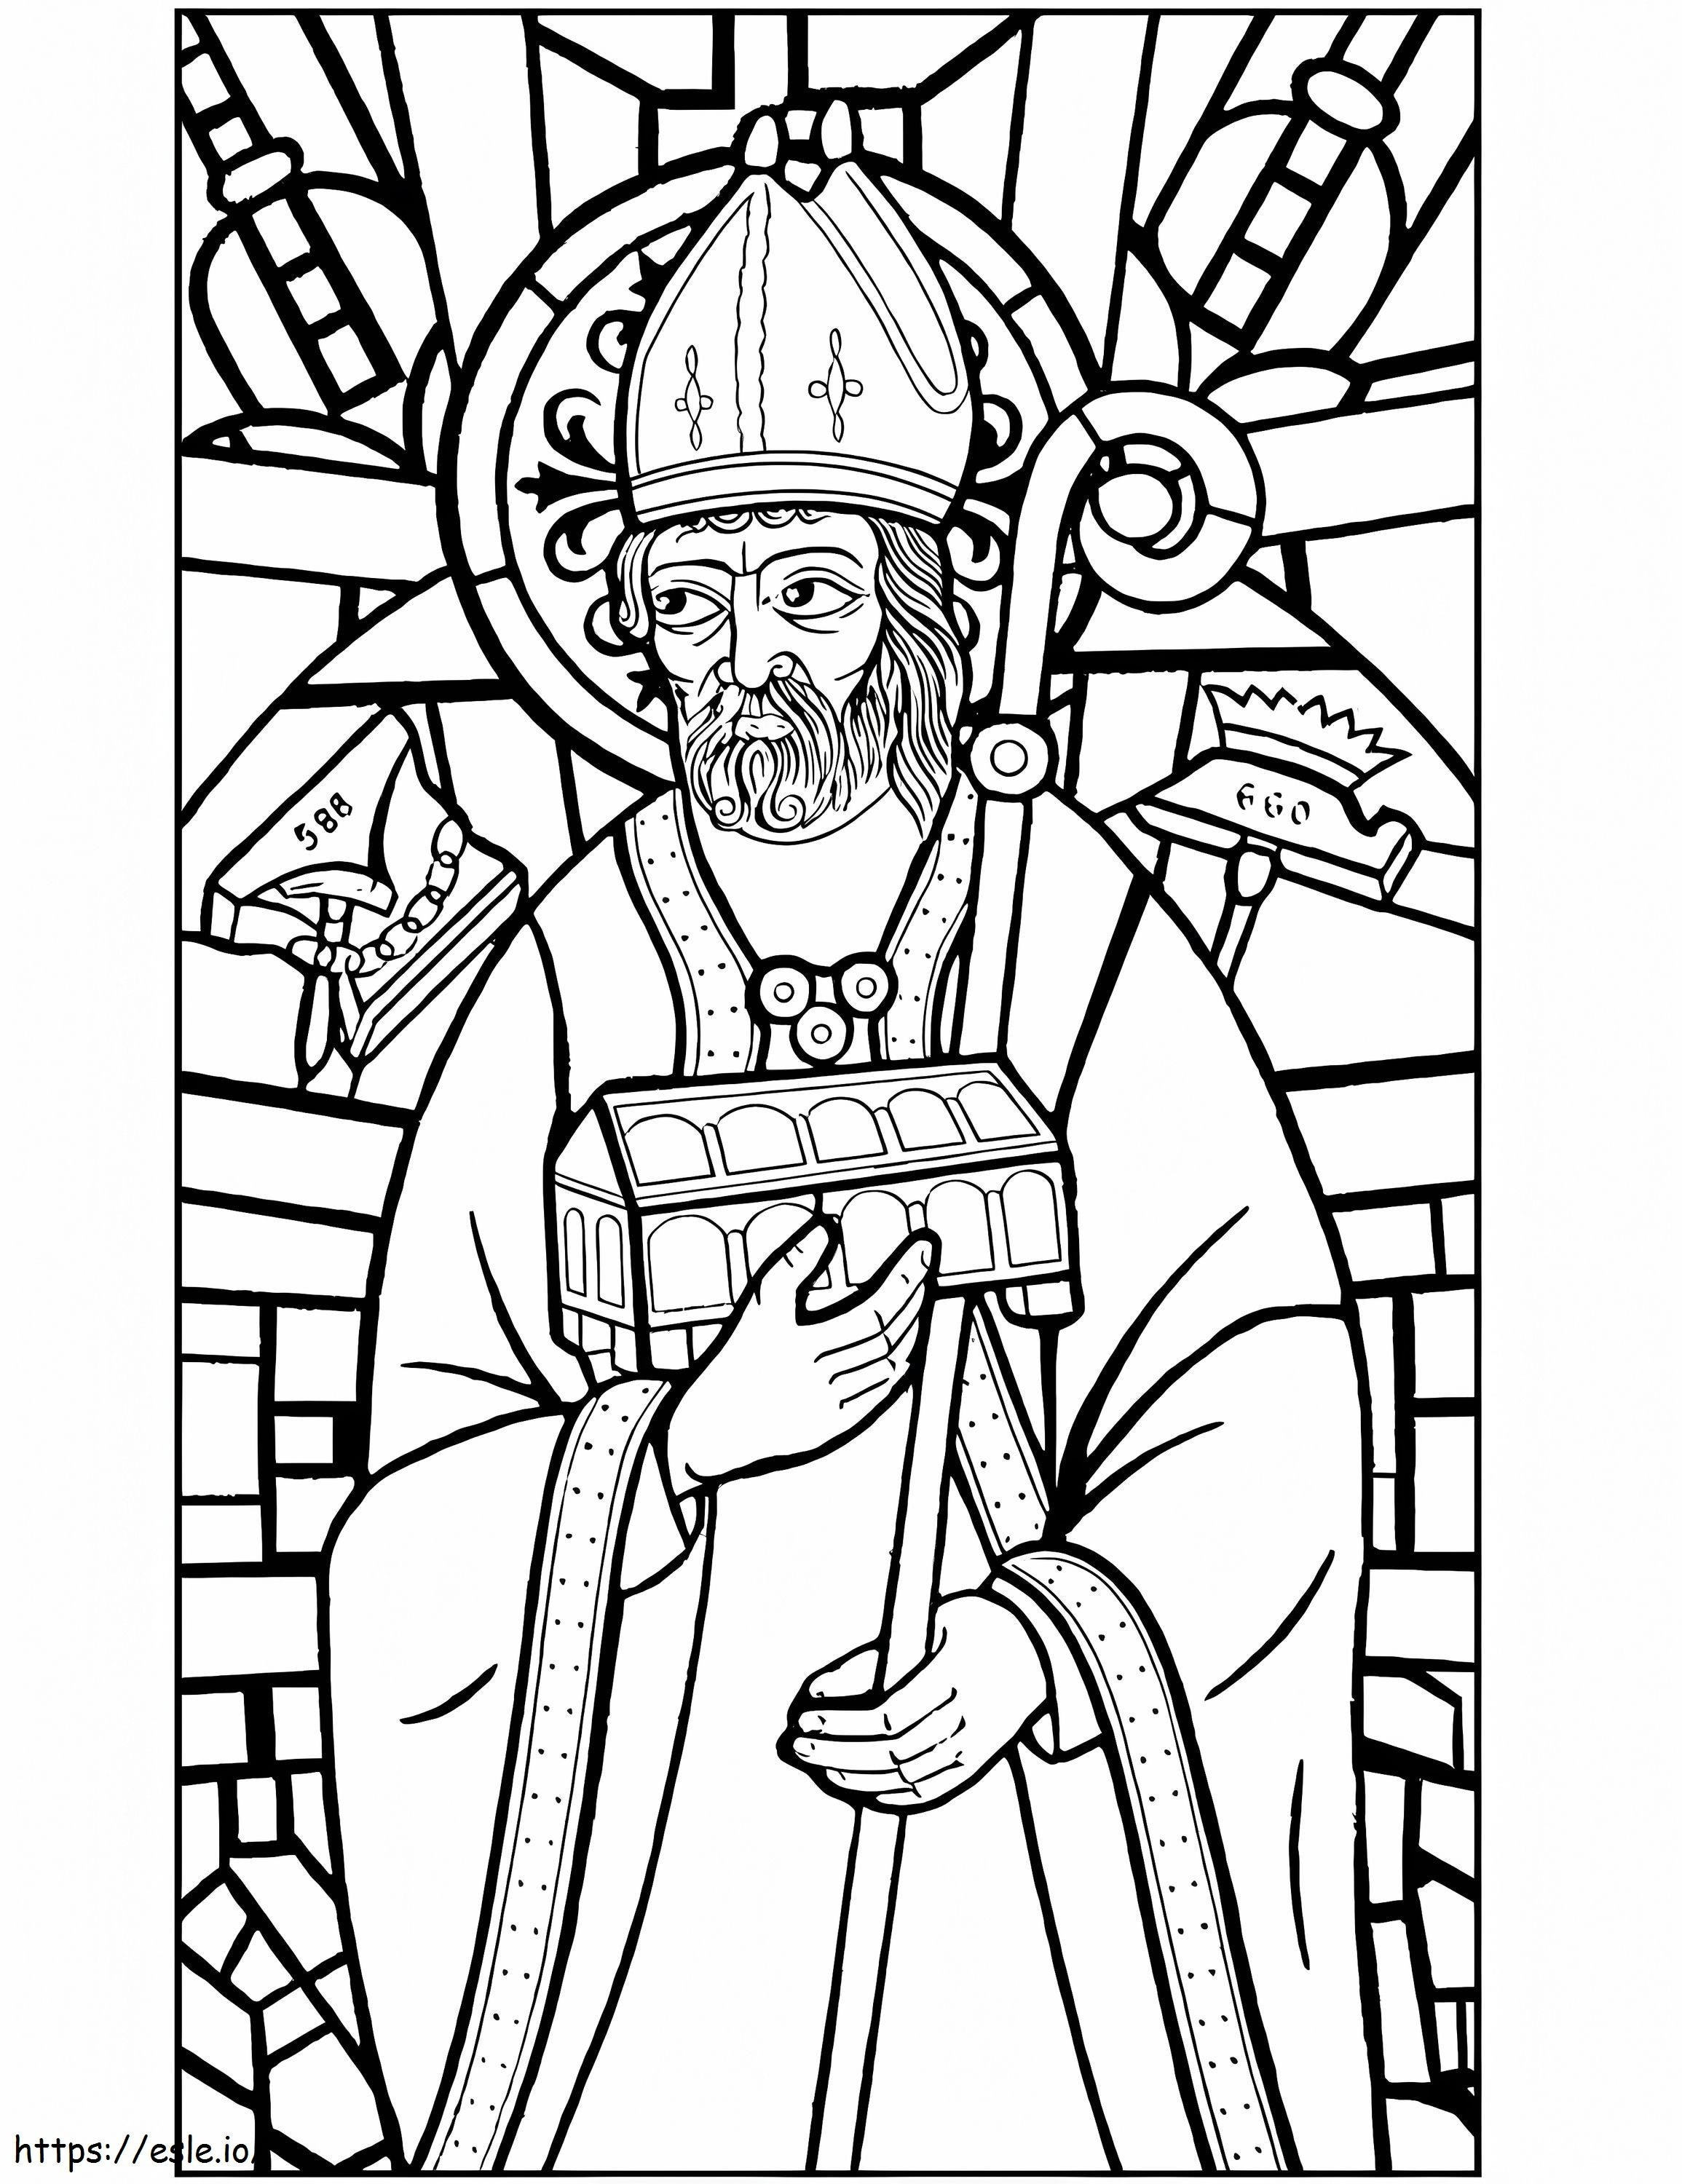 Stained Glass 5 coloring page